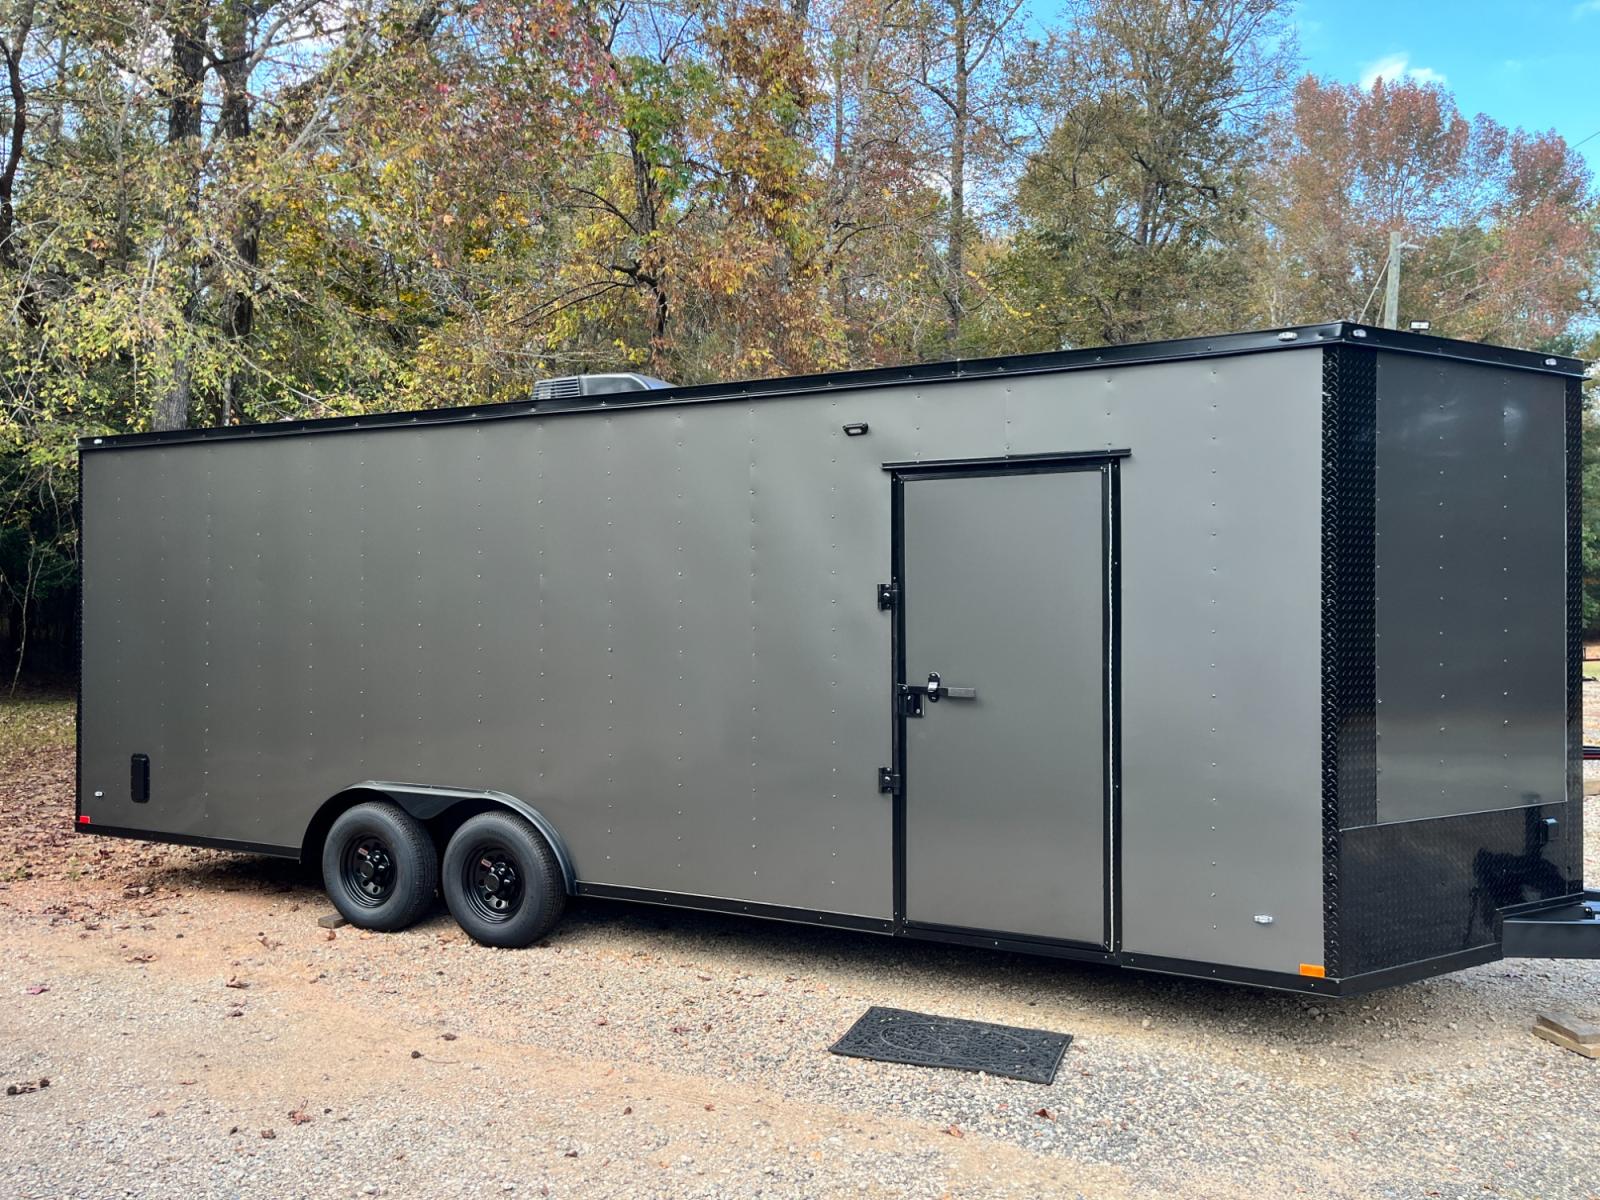 2023 .080 Charcoal Metallic w/Black Out Pkg. Elite Cargo 8.5ft X 24ft Tandem , located at 1330 Rainey Rd., Macon, 31220, (478) 960-1044, 32.845638, -83.778687 - Brand New 2023 Model Elite Cargo Trailer, Made Tifton, GA 7ft 4" Tall Inside Height, Air Conditioner, Insulated too! 15,500 BTU A/C Unit, 5 Inside LED Light Strips! Lights Up Really Bright Inside! This Deluxe Enclosed Car Hauler has Awesome Features! .080 Thick Charcoal Metallic Skin! Stunning - Photo #1